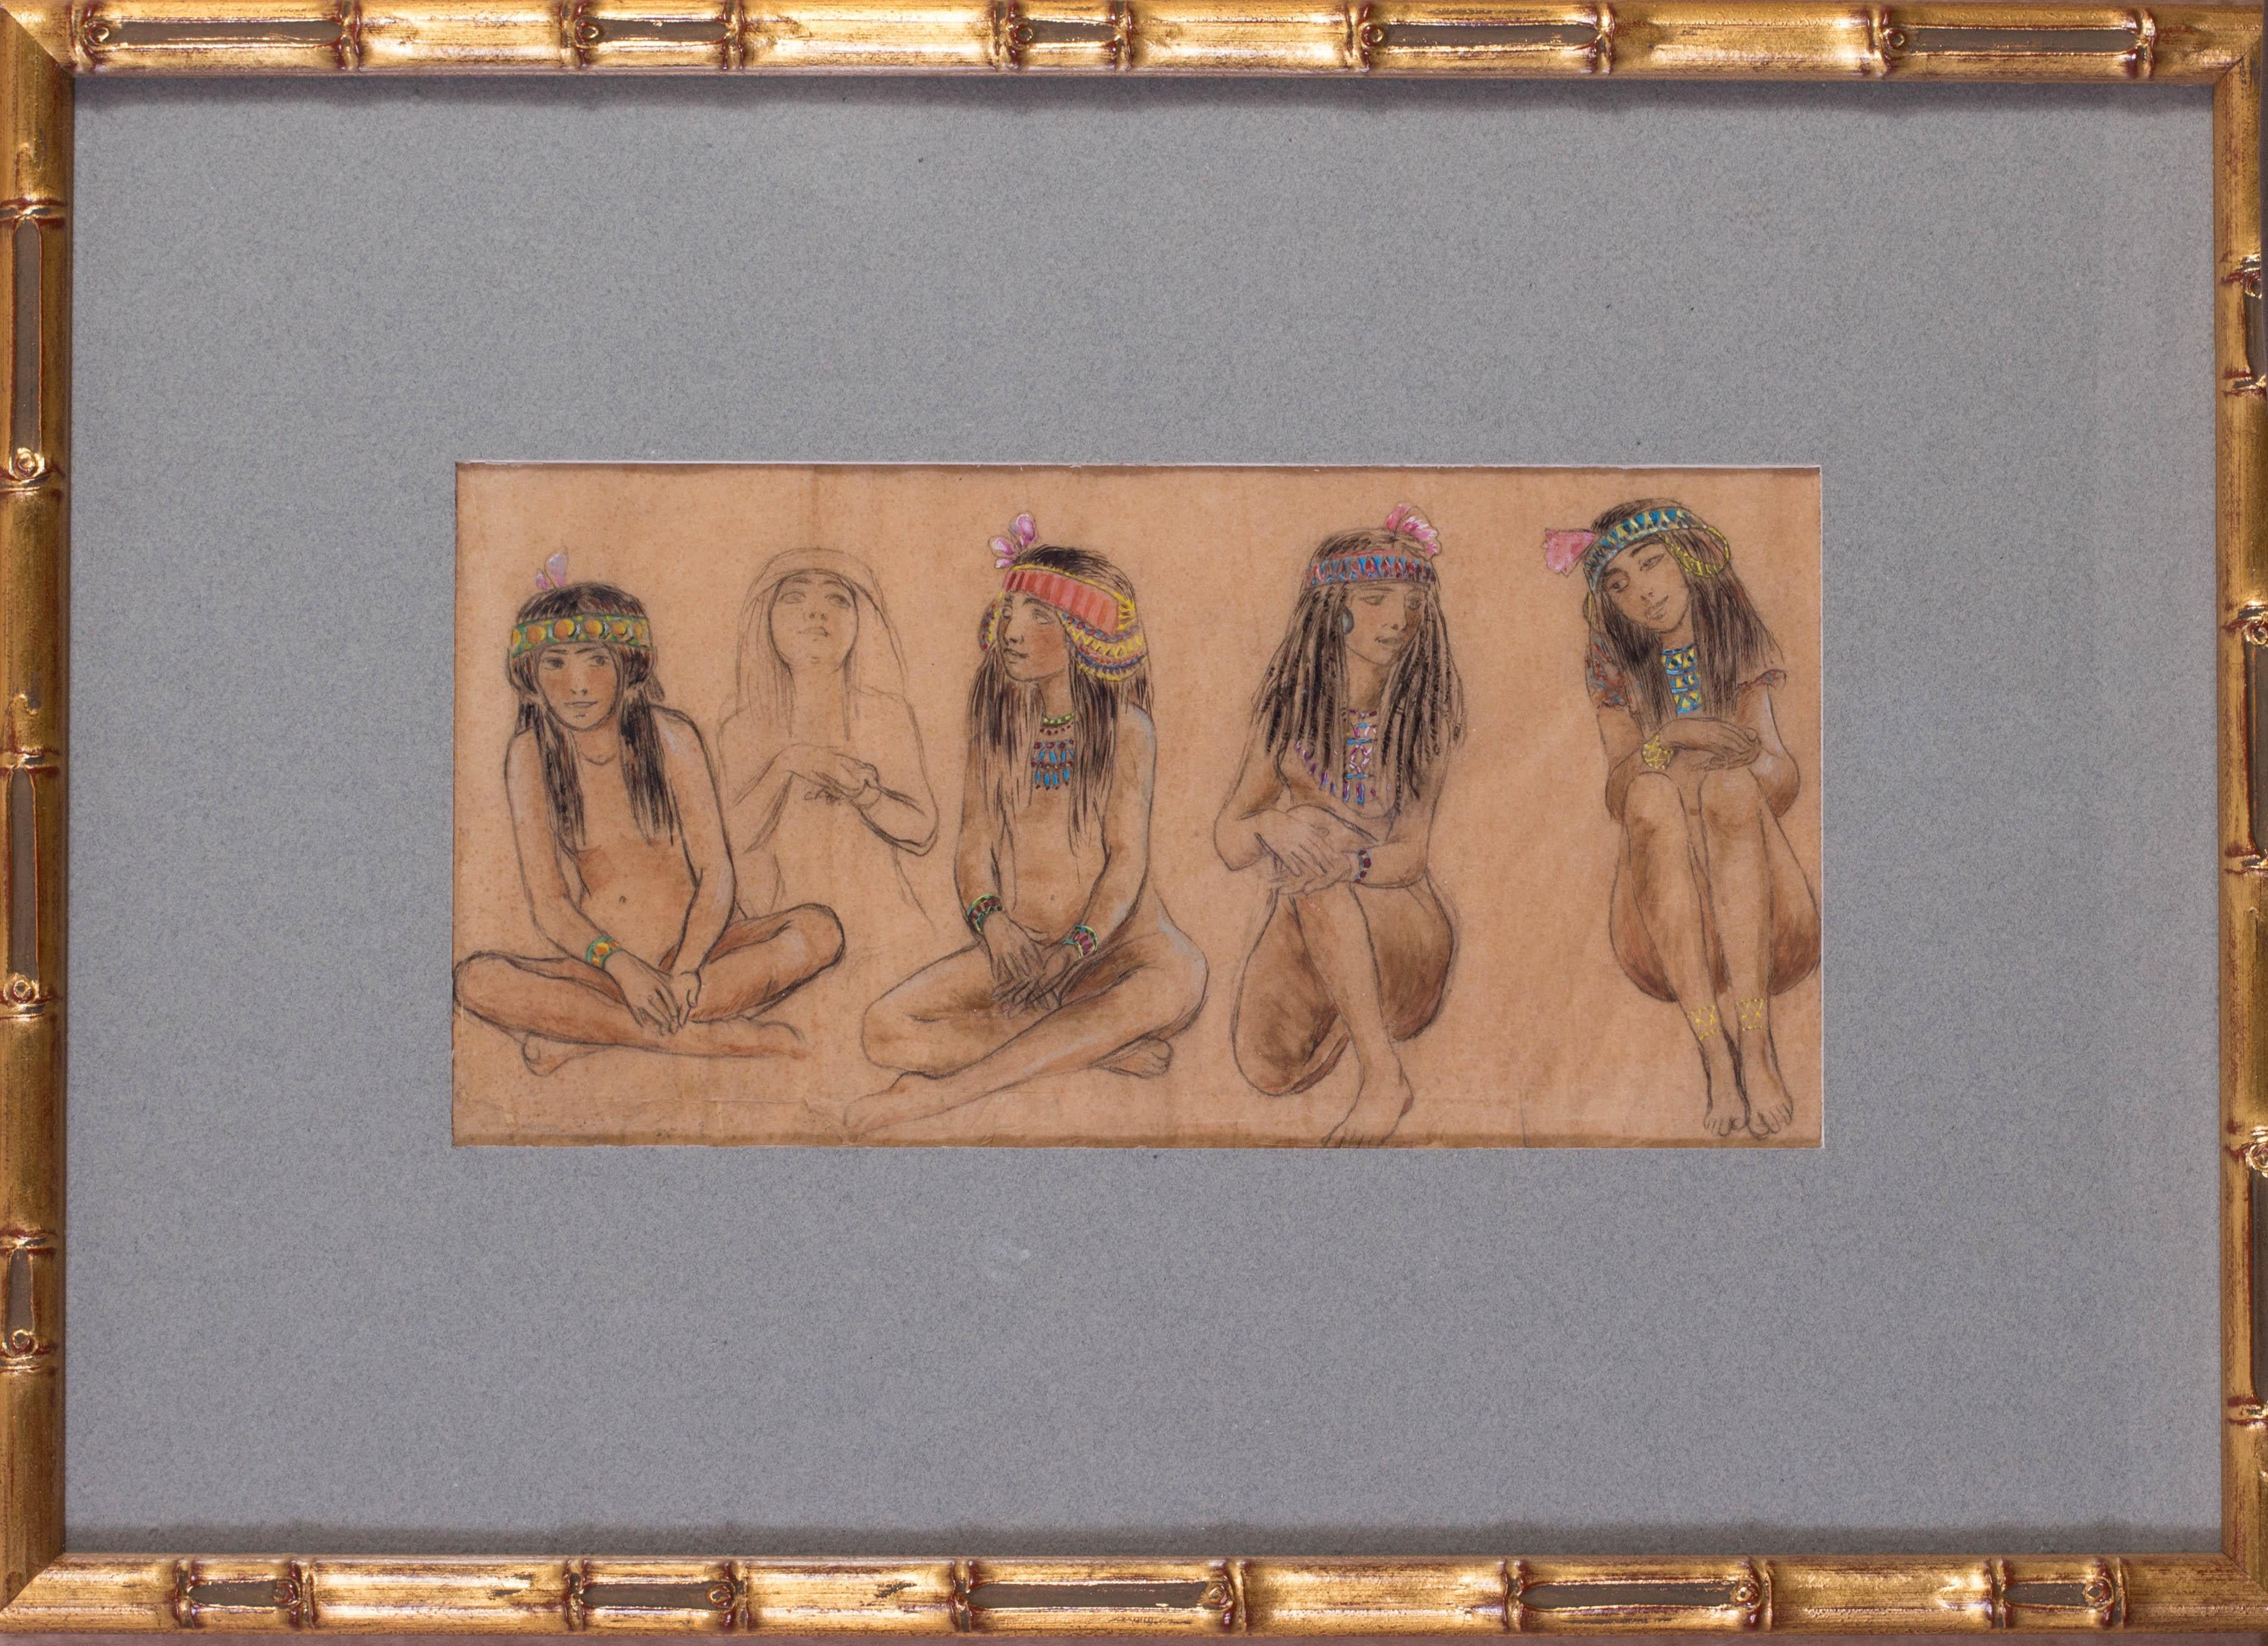 Georges Antoine Rochegrosse (French, 1859 – 1938)
Fillettes Egyptiennes
Pencil, gouache and watercolour on paper
6 x 12in. (15.2 x 30.2cm.)
Provenance: Marambat-Malafosse Atelier Rochegrosse, Toulouse